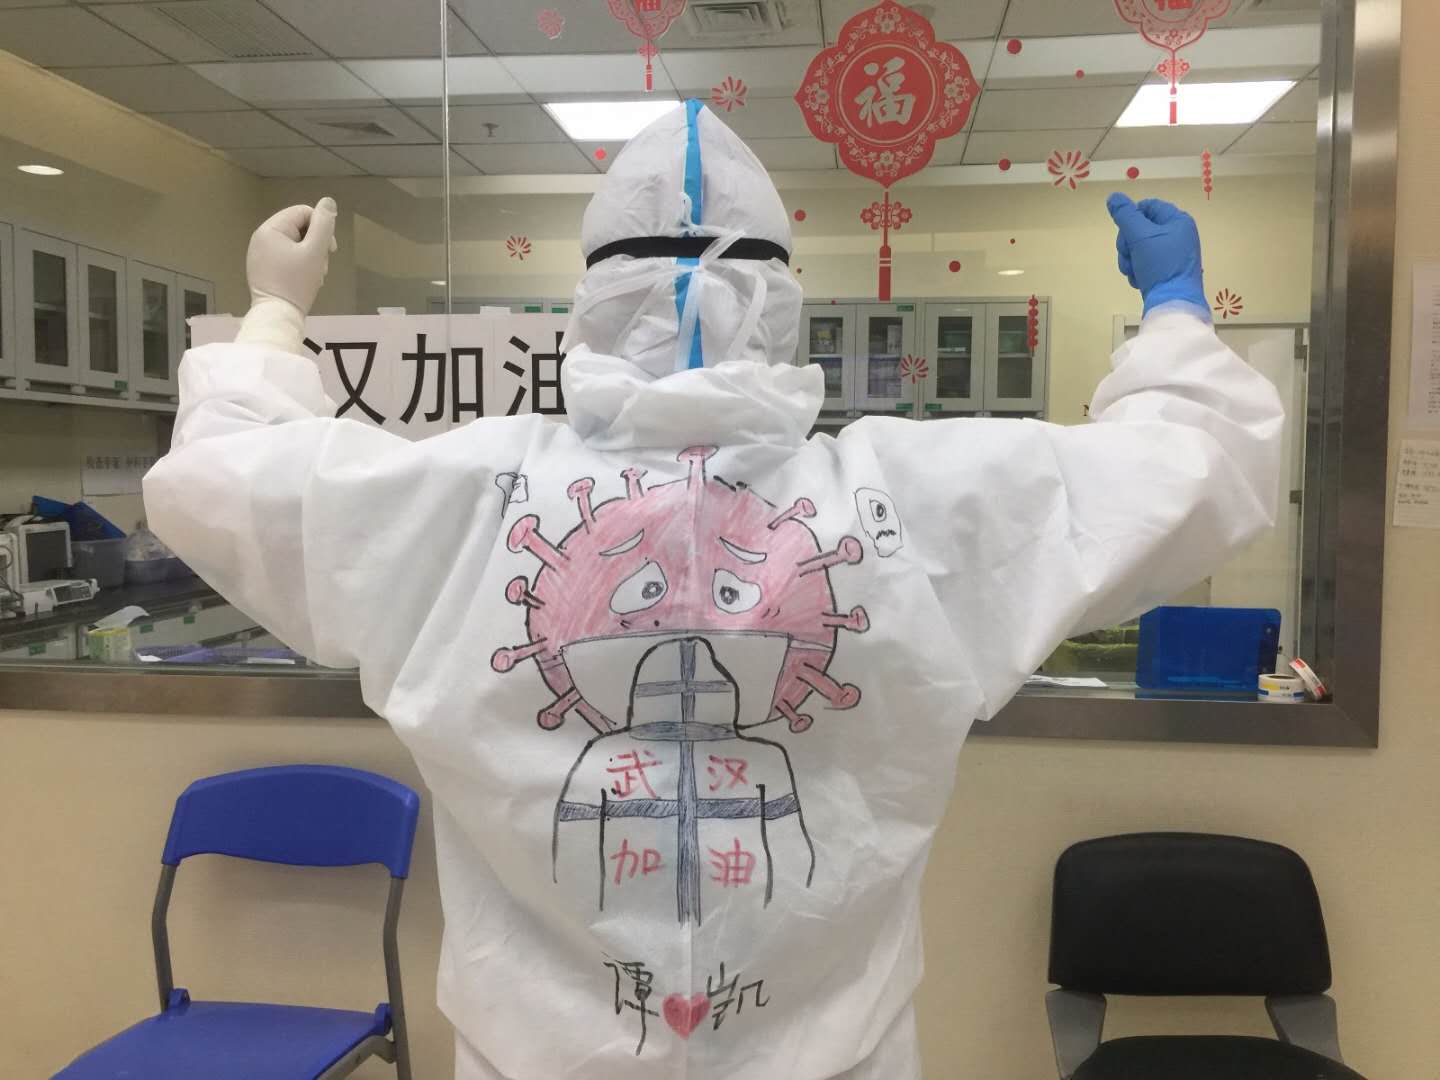 Post-90s frontline nurse draws on colleagues’ protective suits to boost morale